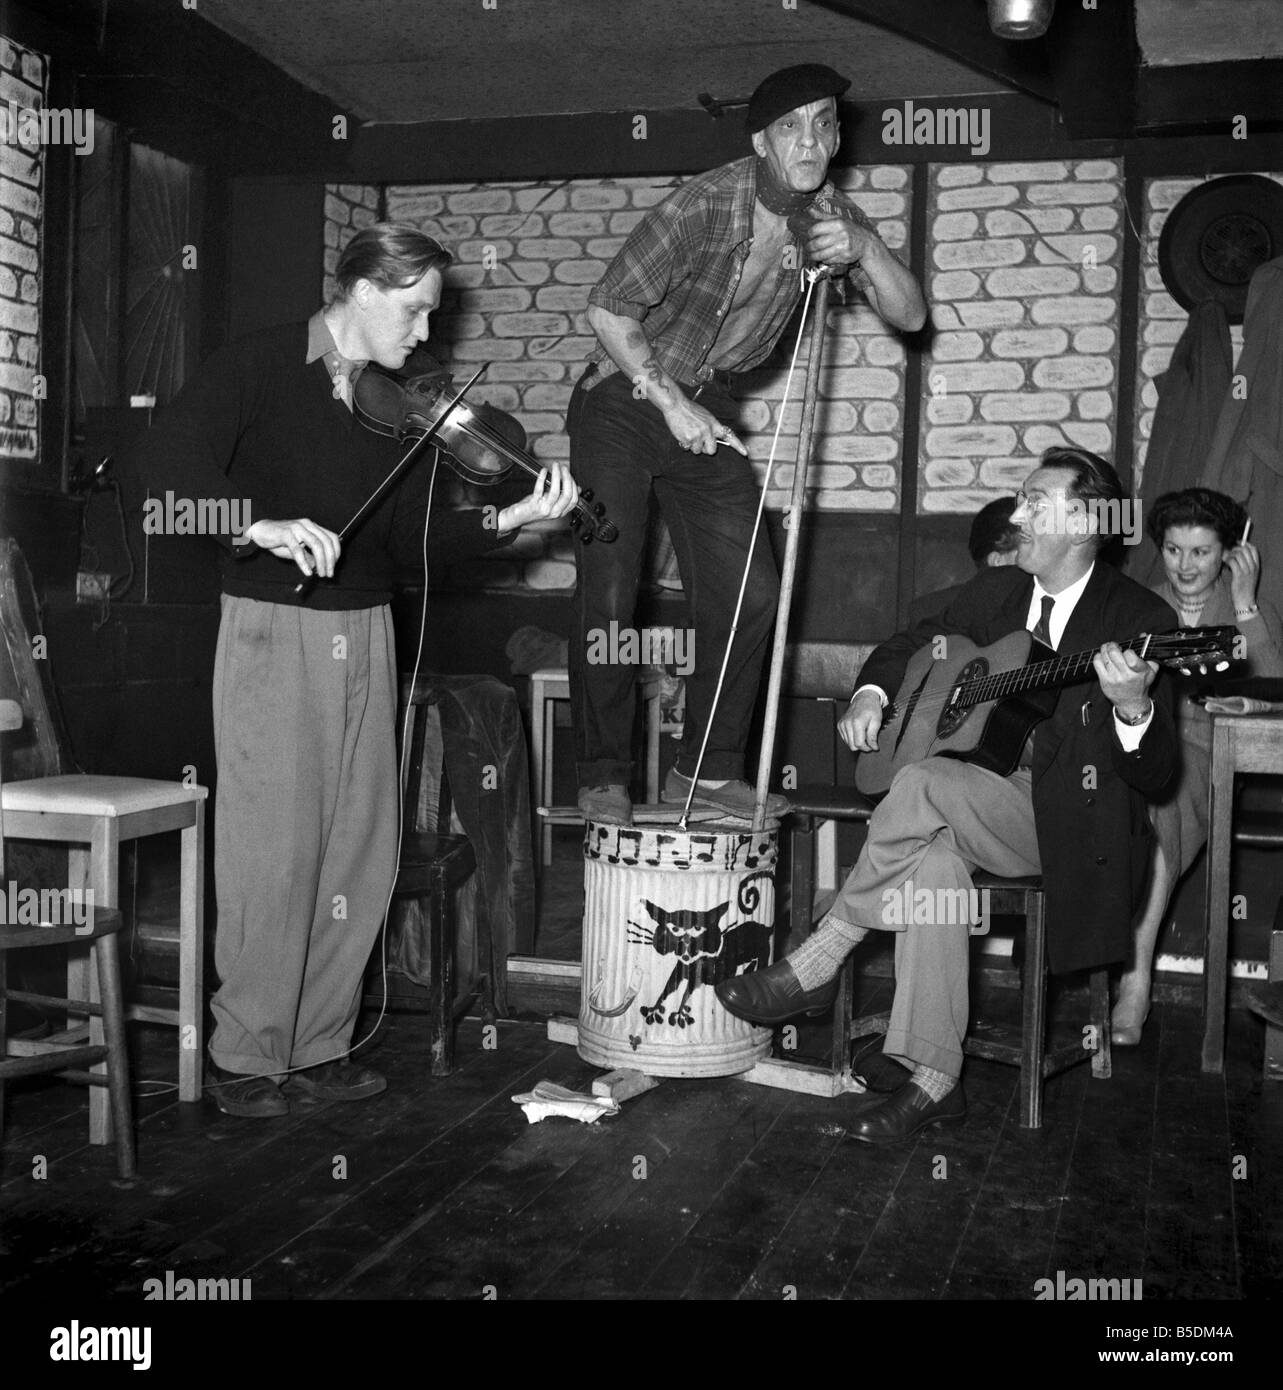 Skiffle group belived to be called the Black Cat seen here performing in a pub. The bass is created by using a dustbin and a broom. 1954 Circa 1954 Stock Photo